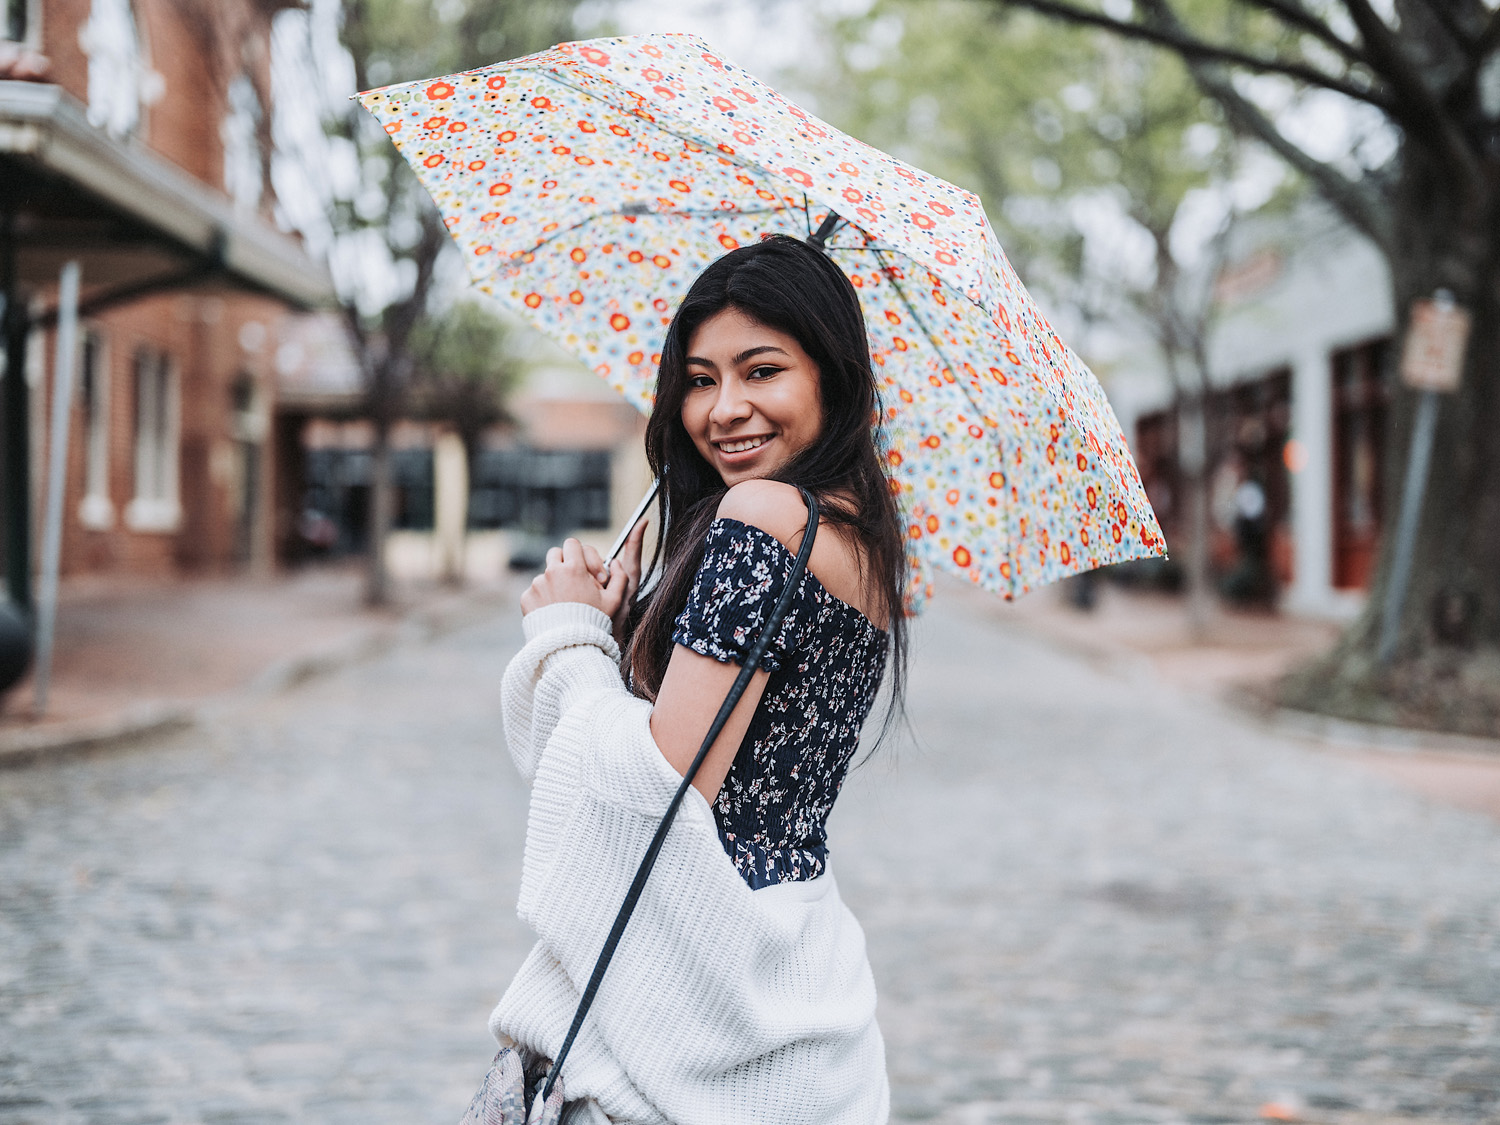 Woman with black long hair smiling and holding floral umbrella